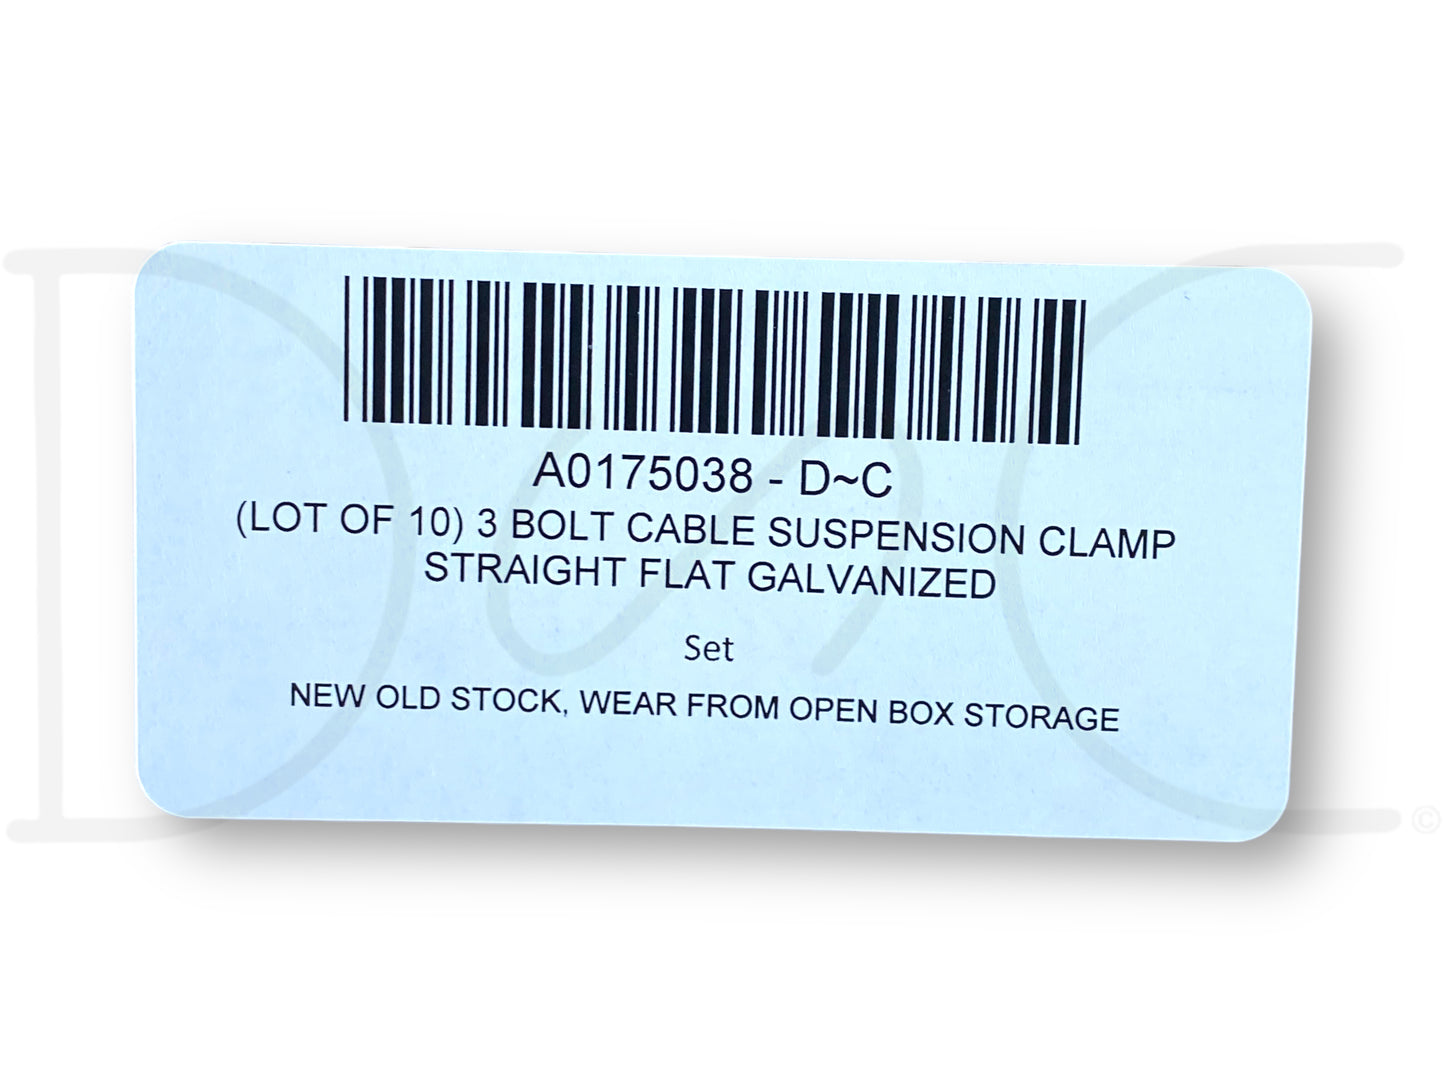 (Lot Of 10) 3 Bolt Cable Suspension Clamp Straight Flat Galvanized